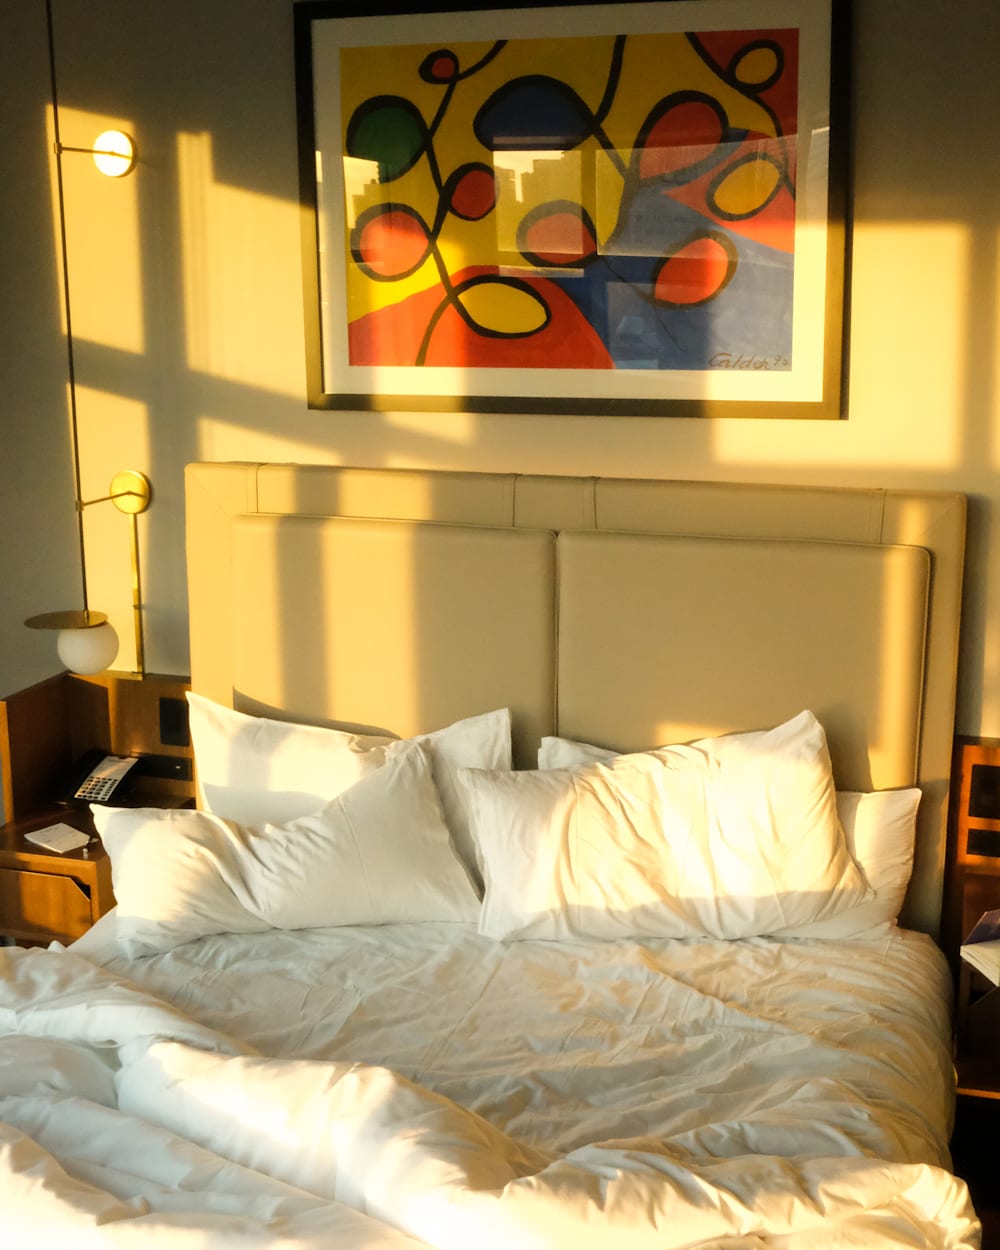 ModernHaus Soho bedroom with sunlight creating shadows on the wall